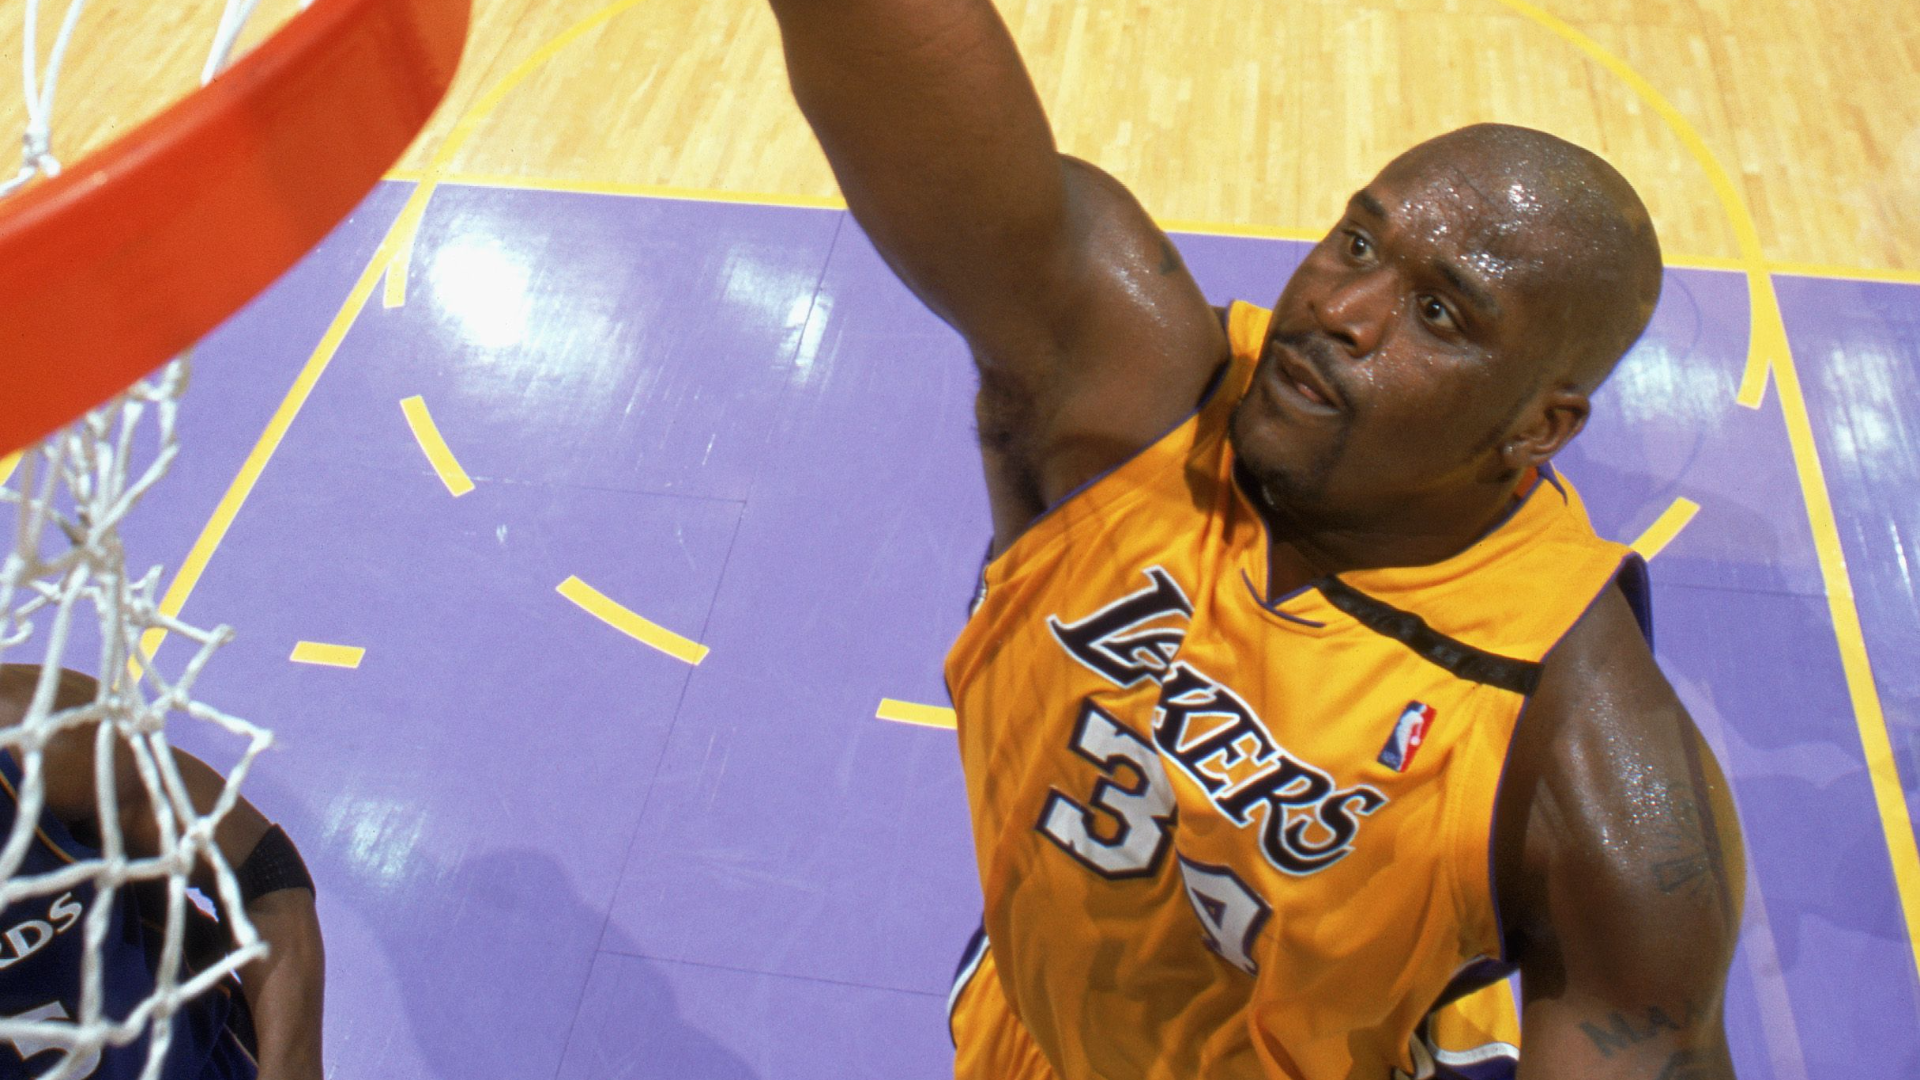 New Champion NBA Los Angeles Lakers Shaquille O'Neal Purple